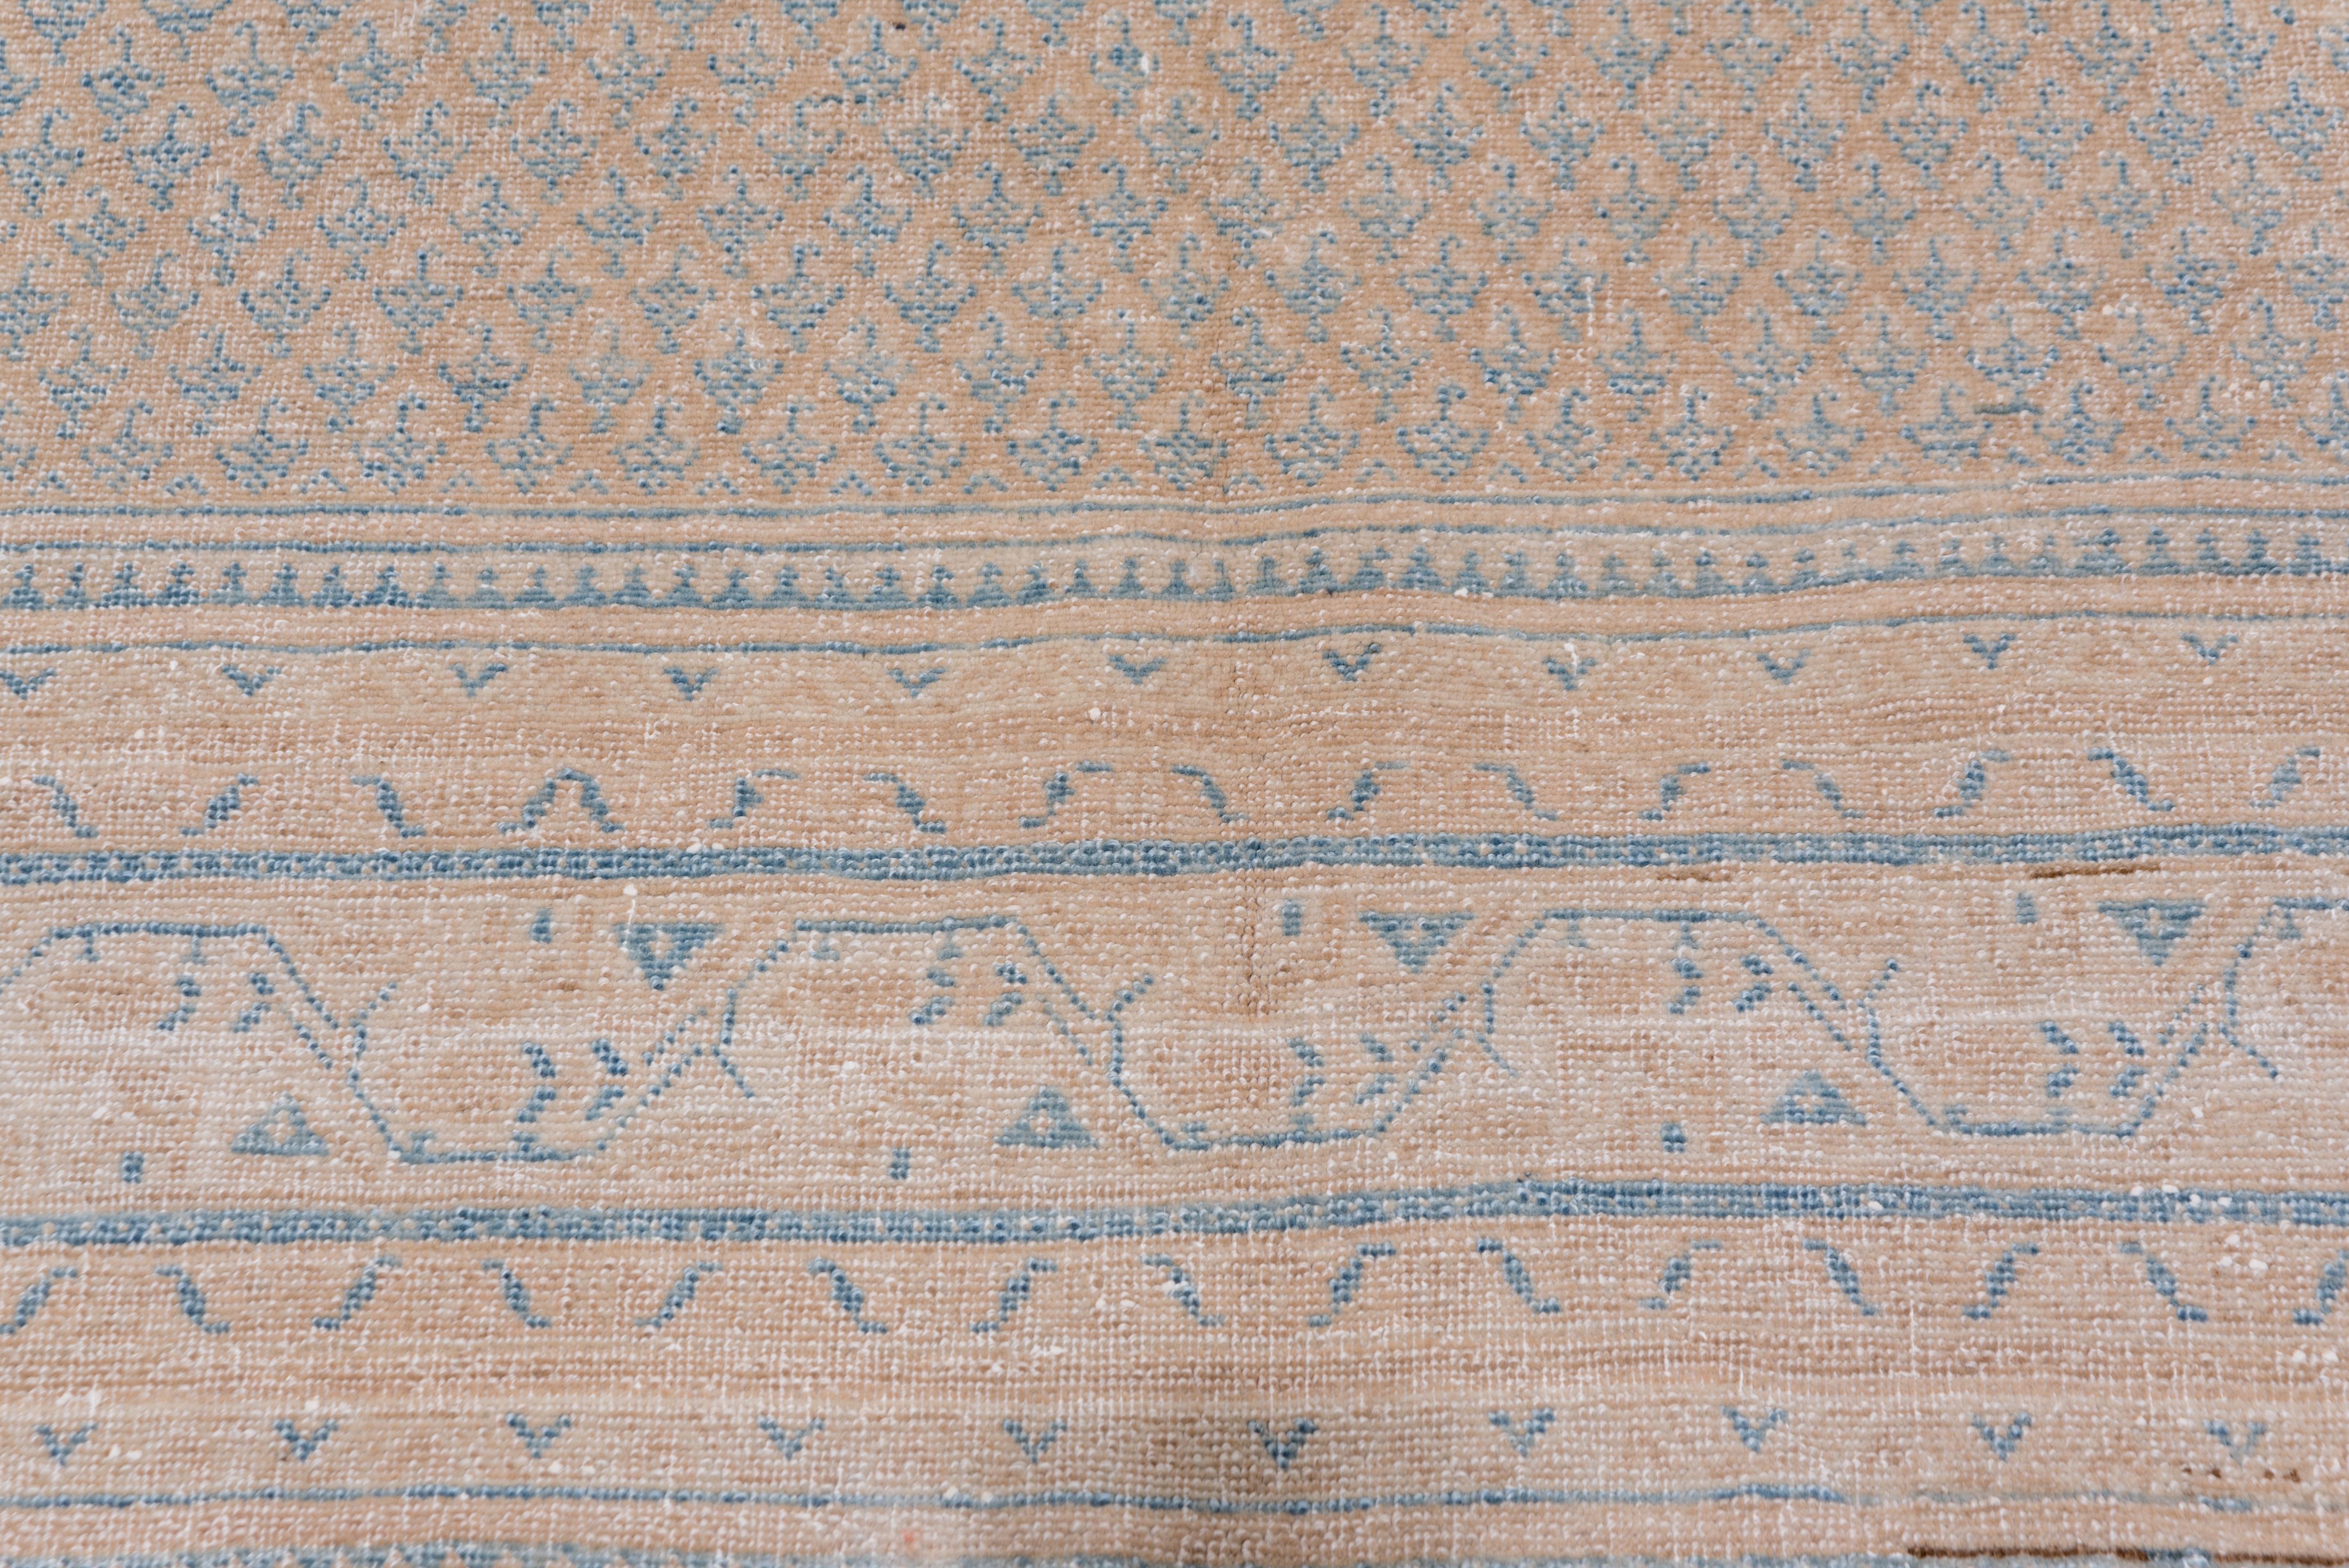 Mid-20th Century Midcentury Mahal Carpet, Neutral Palete, Blue Accents For Sale